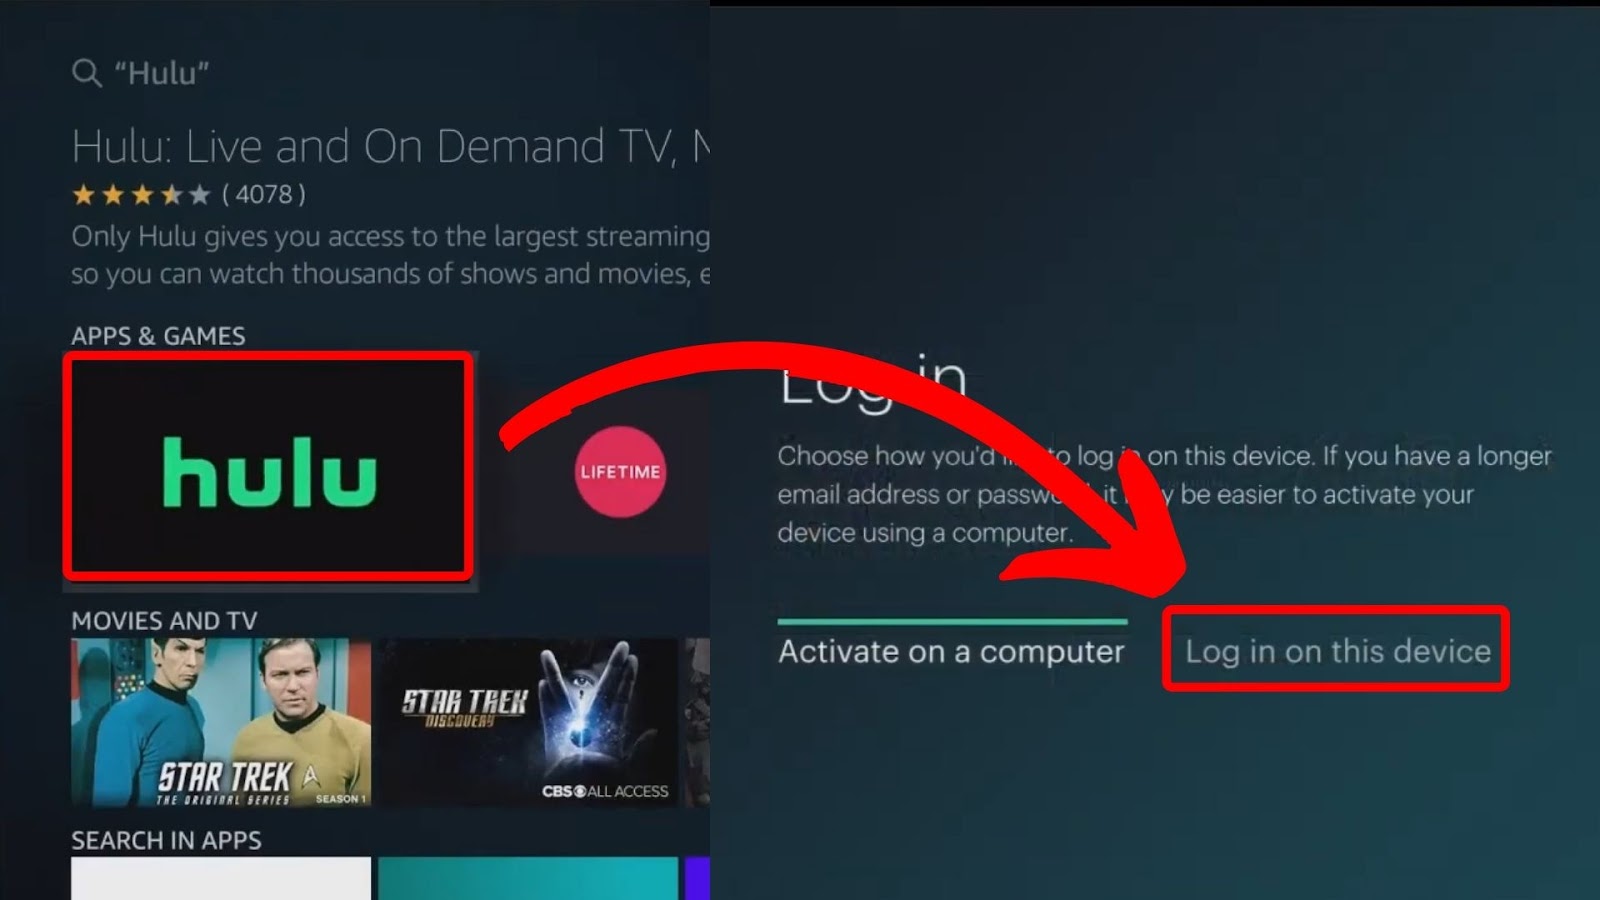 How to Download Hulu on Samsung TV - Amazon Firestick